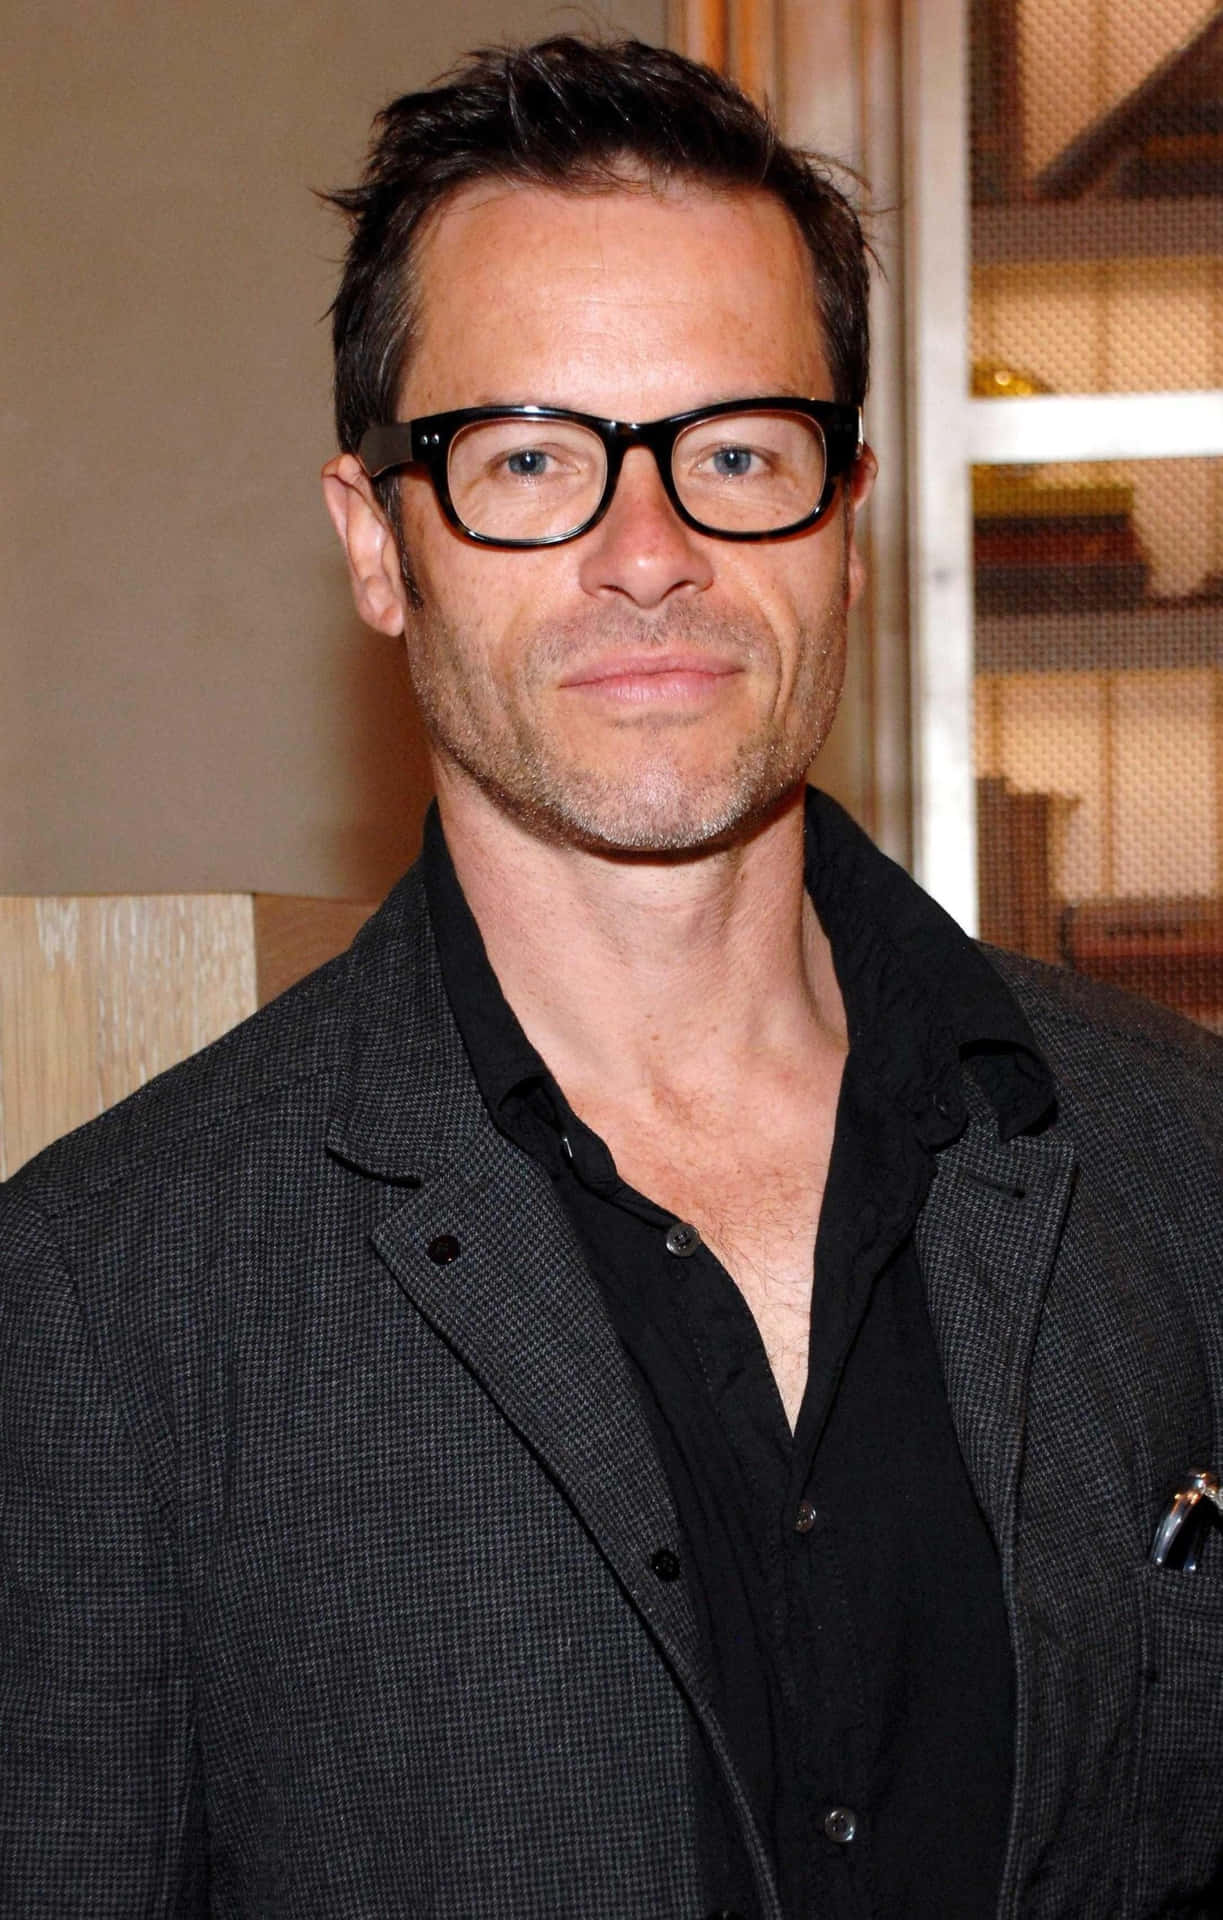 Guy Pearce at the Height of His Career" Wallpaper